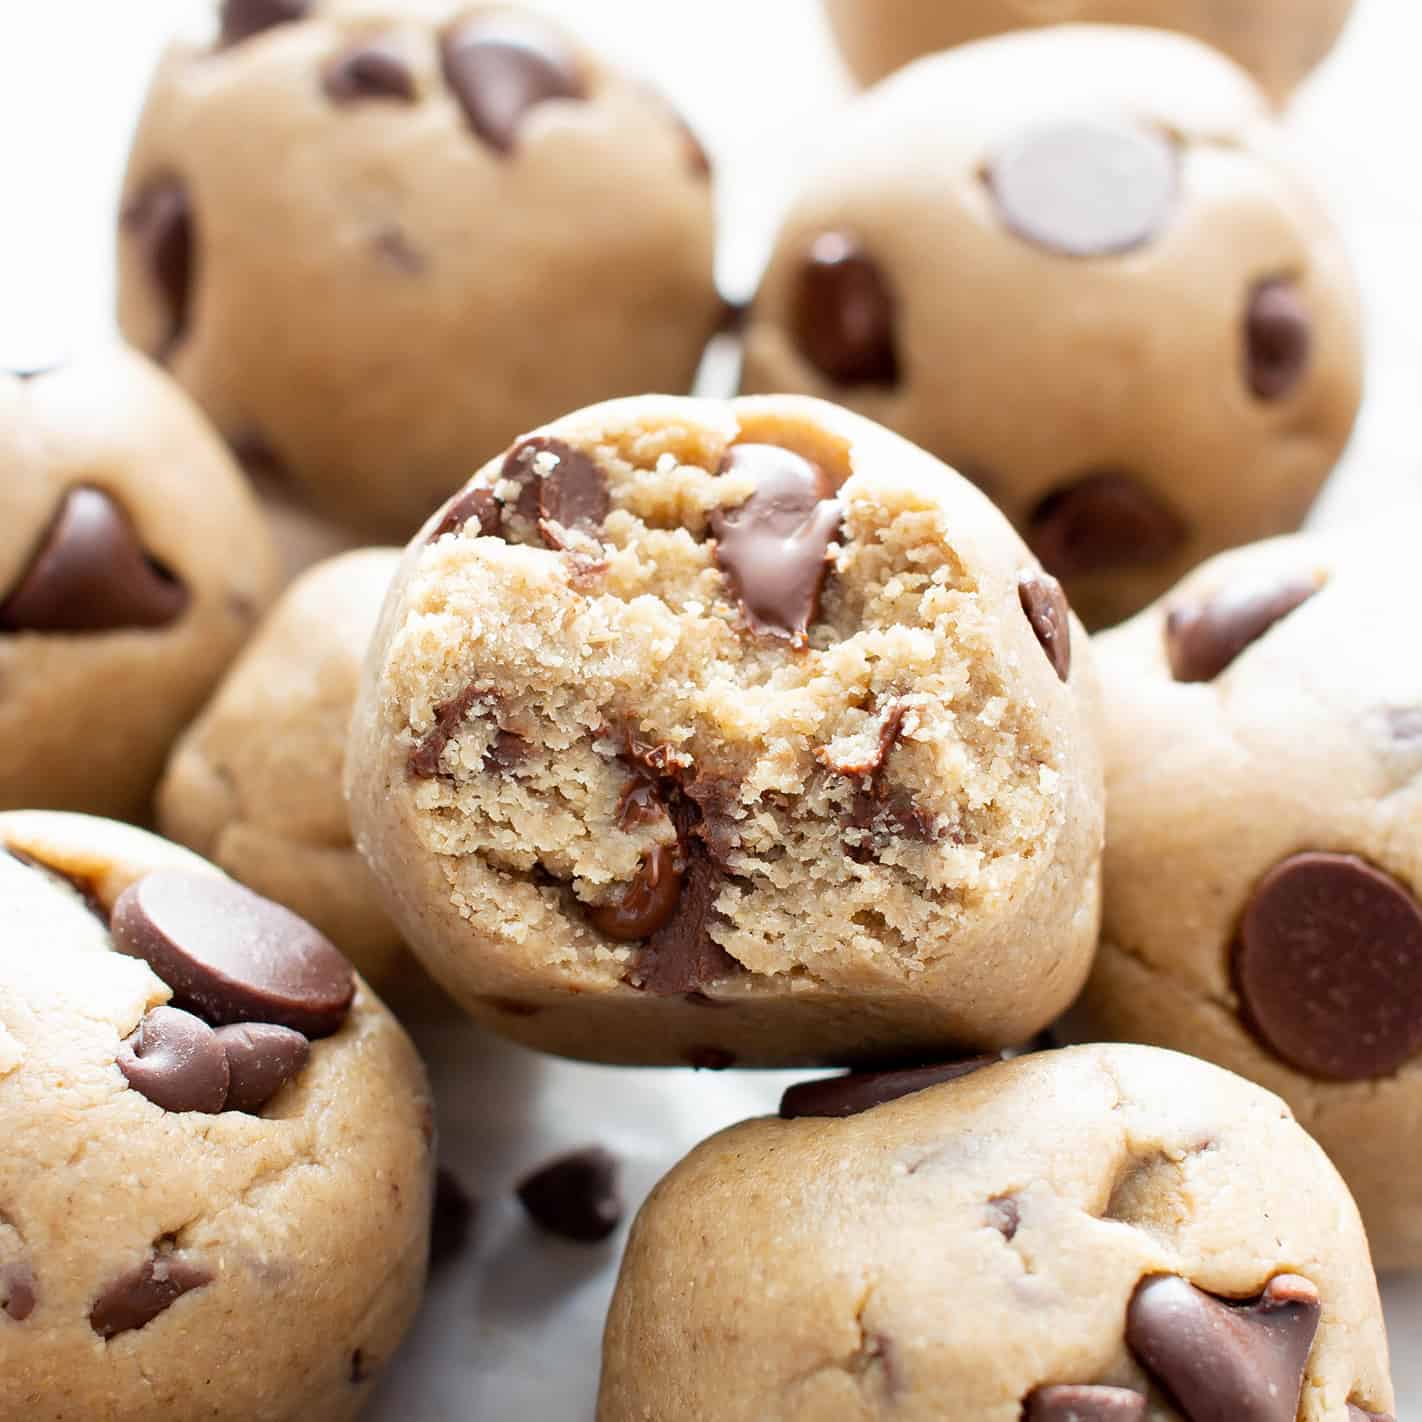 Vegan Cookie Dough Bites: a 5 ingredient healthy cookie dough recipe for vegan edible cookie dough! Safe to eat raw & it’s eggless! Made with healthy vegan ingredients. #Vegan #Healthy #CookieDough #Edible | Recipe at BeamingBaker.com